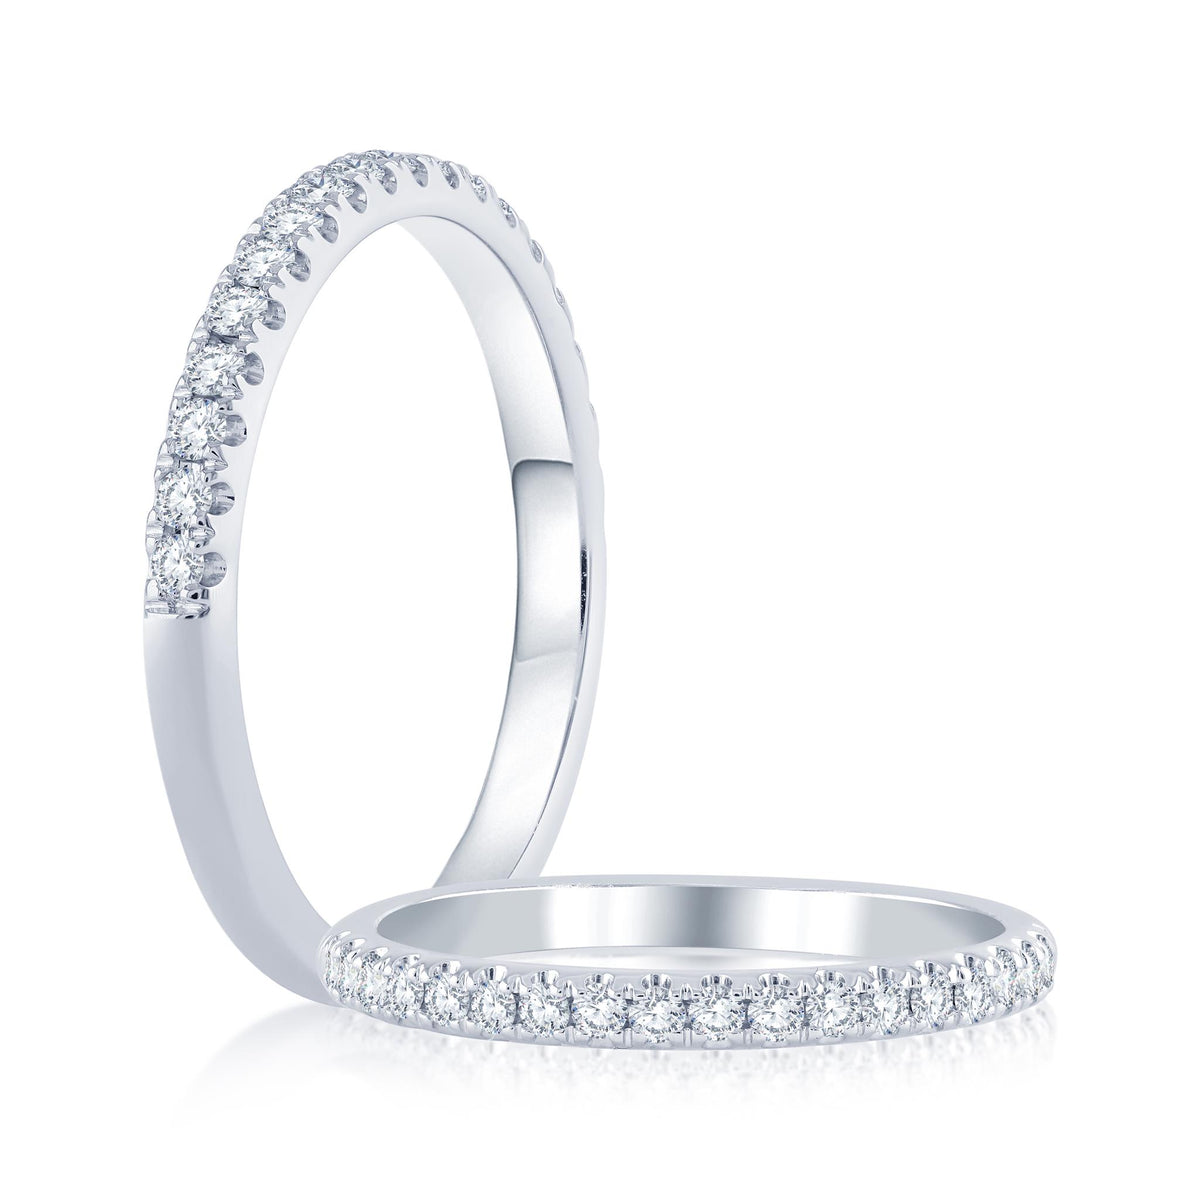 14Kt White Gold Galaxy Band With 0.25cttw Natural Diamonds